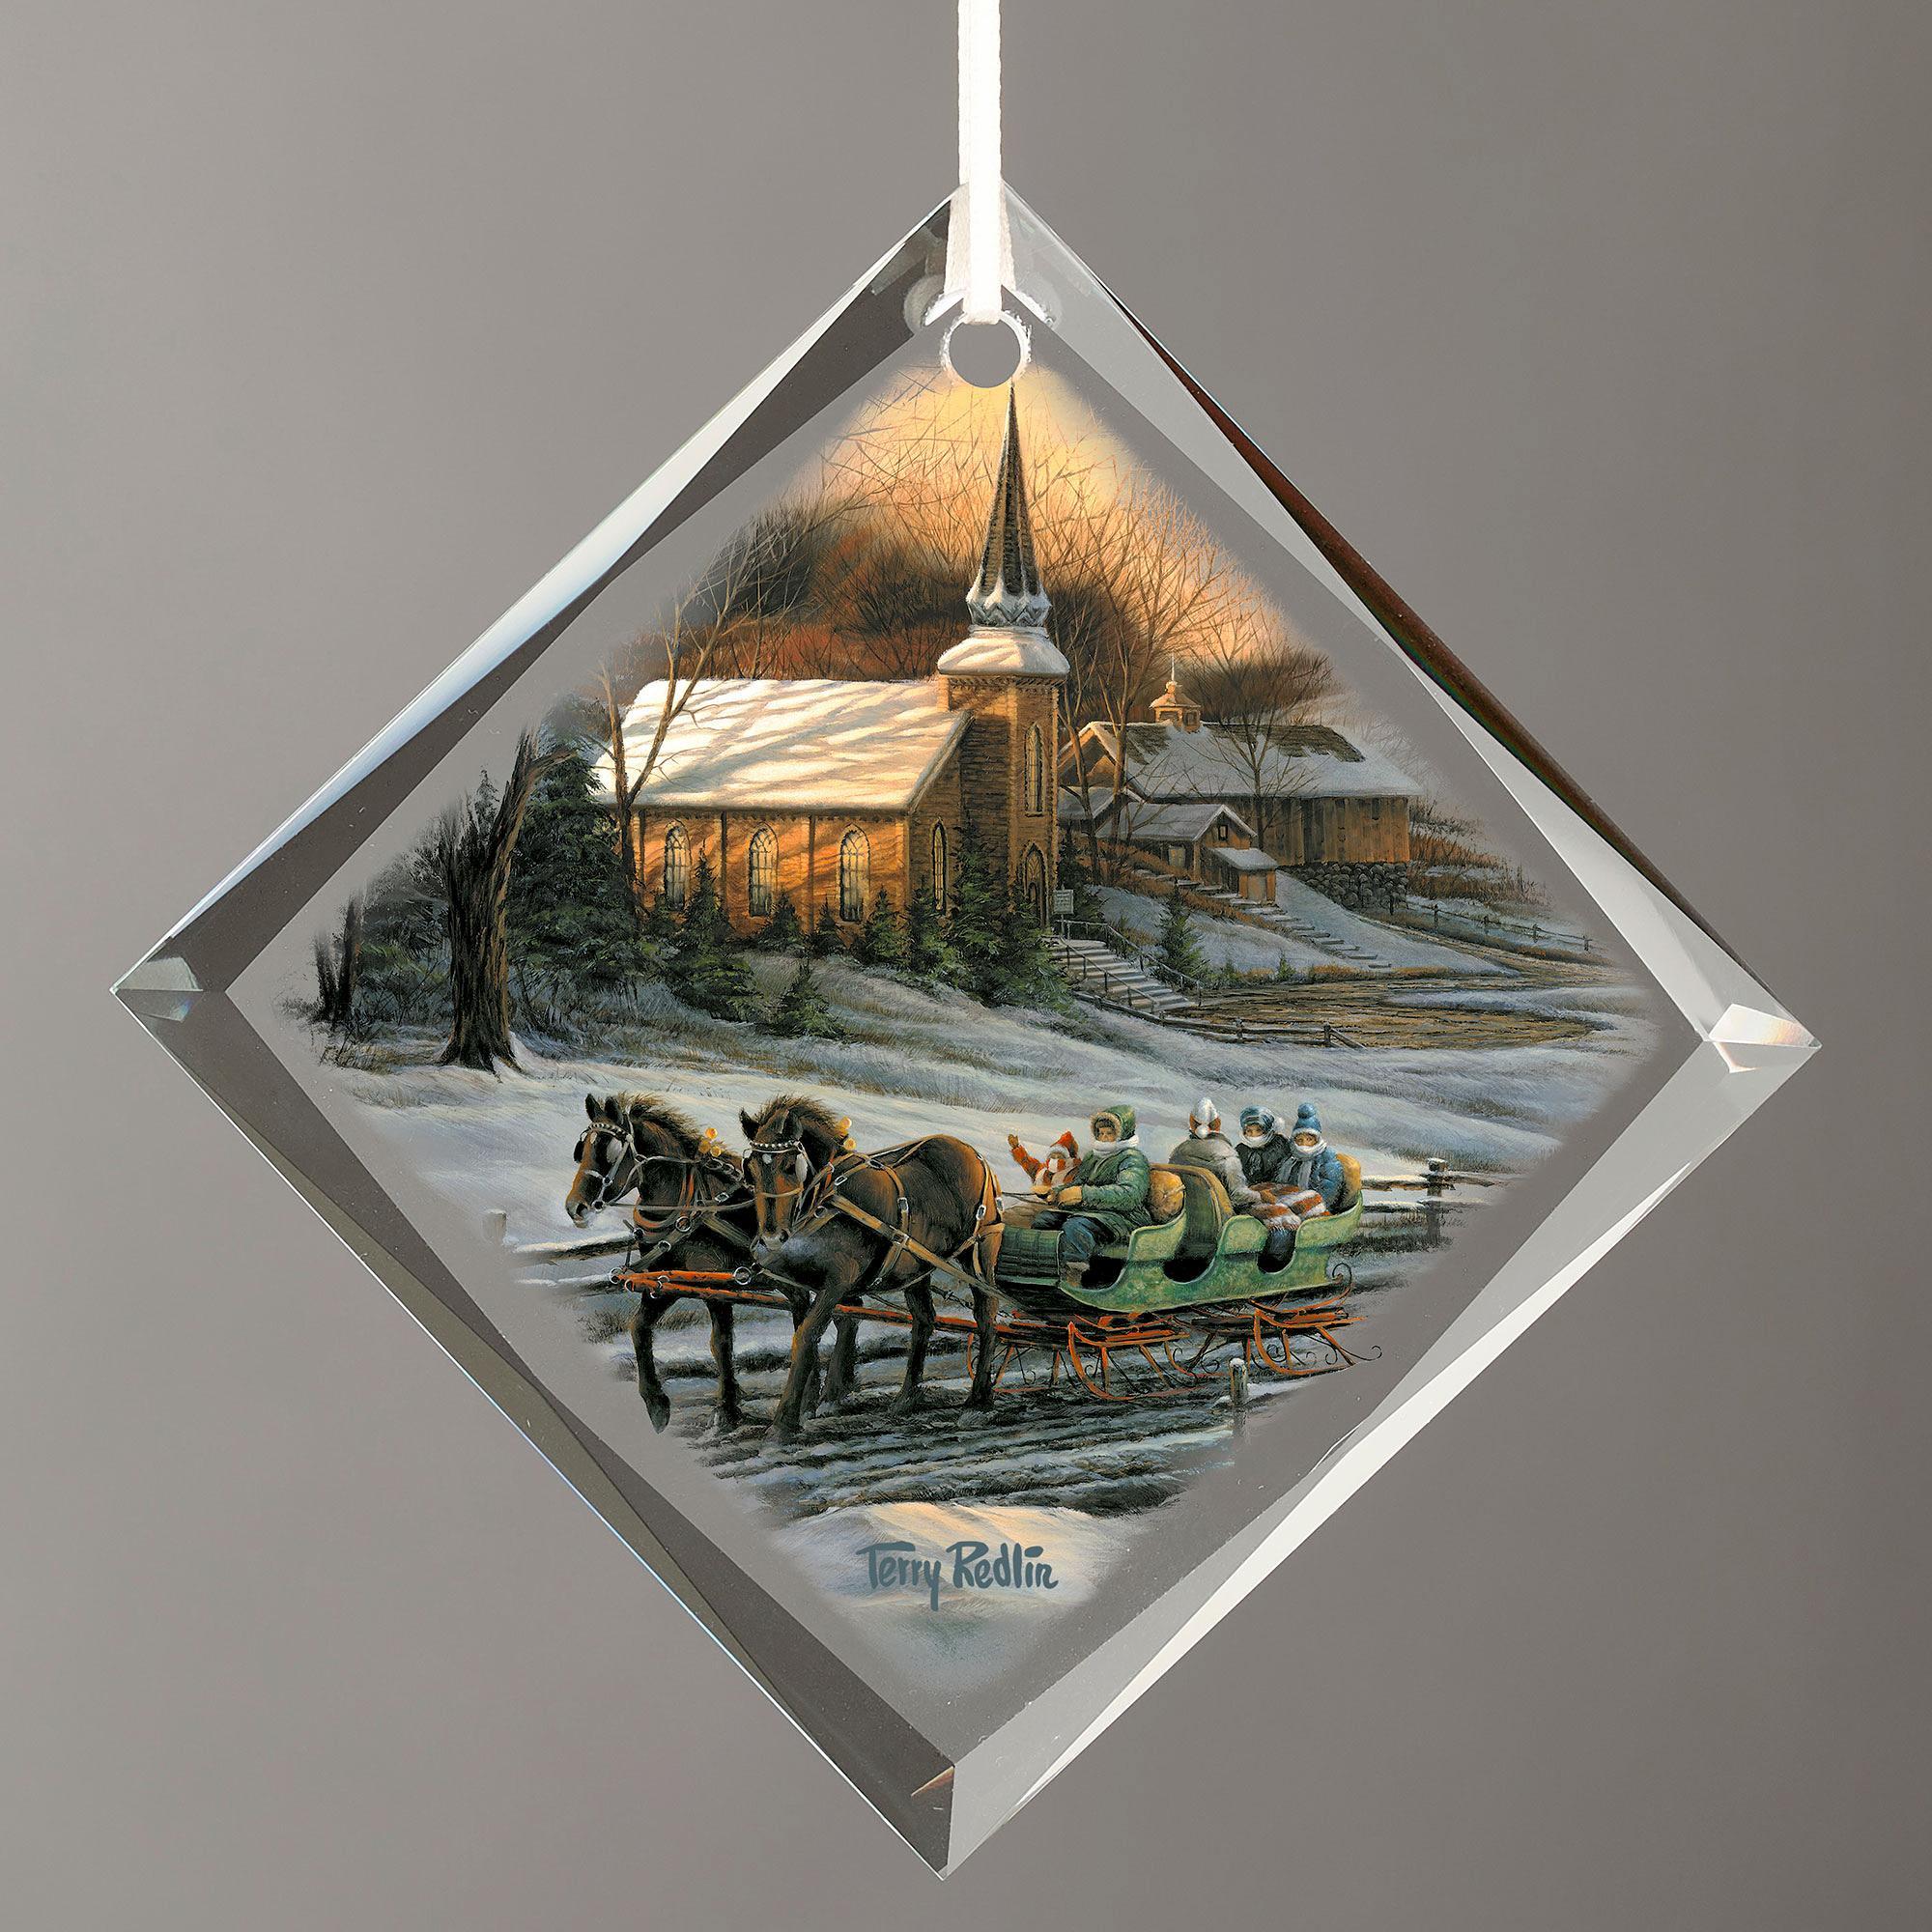 Together for the Season-Sleigh Diamond Shaped Glass Ornament Terry Redlin